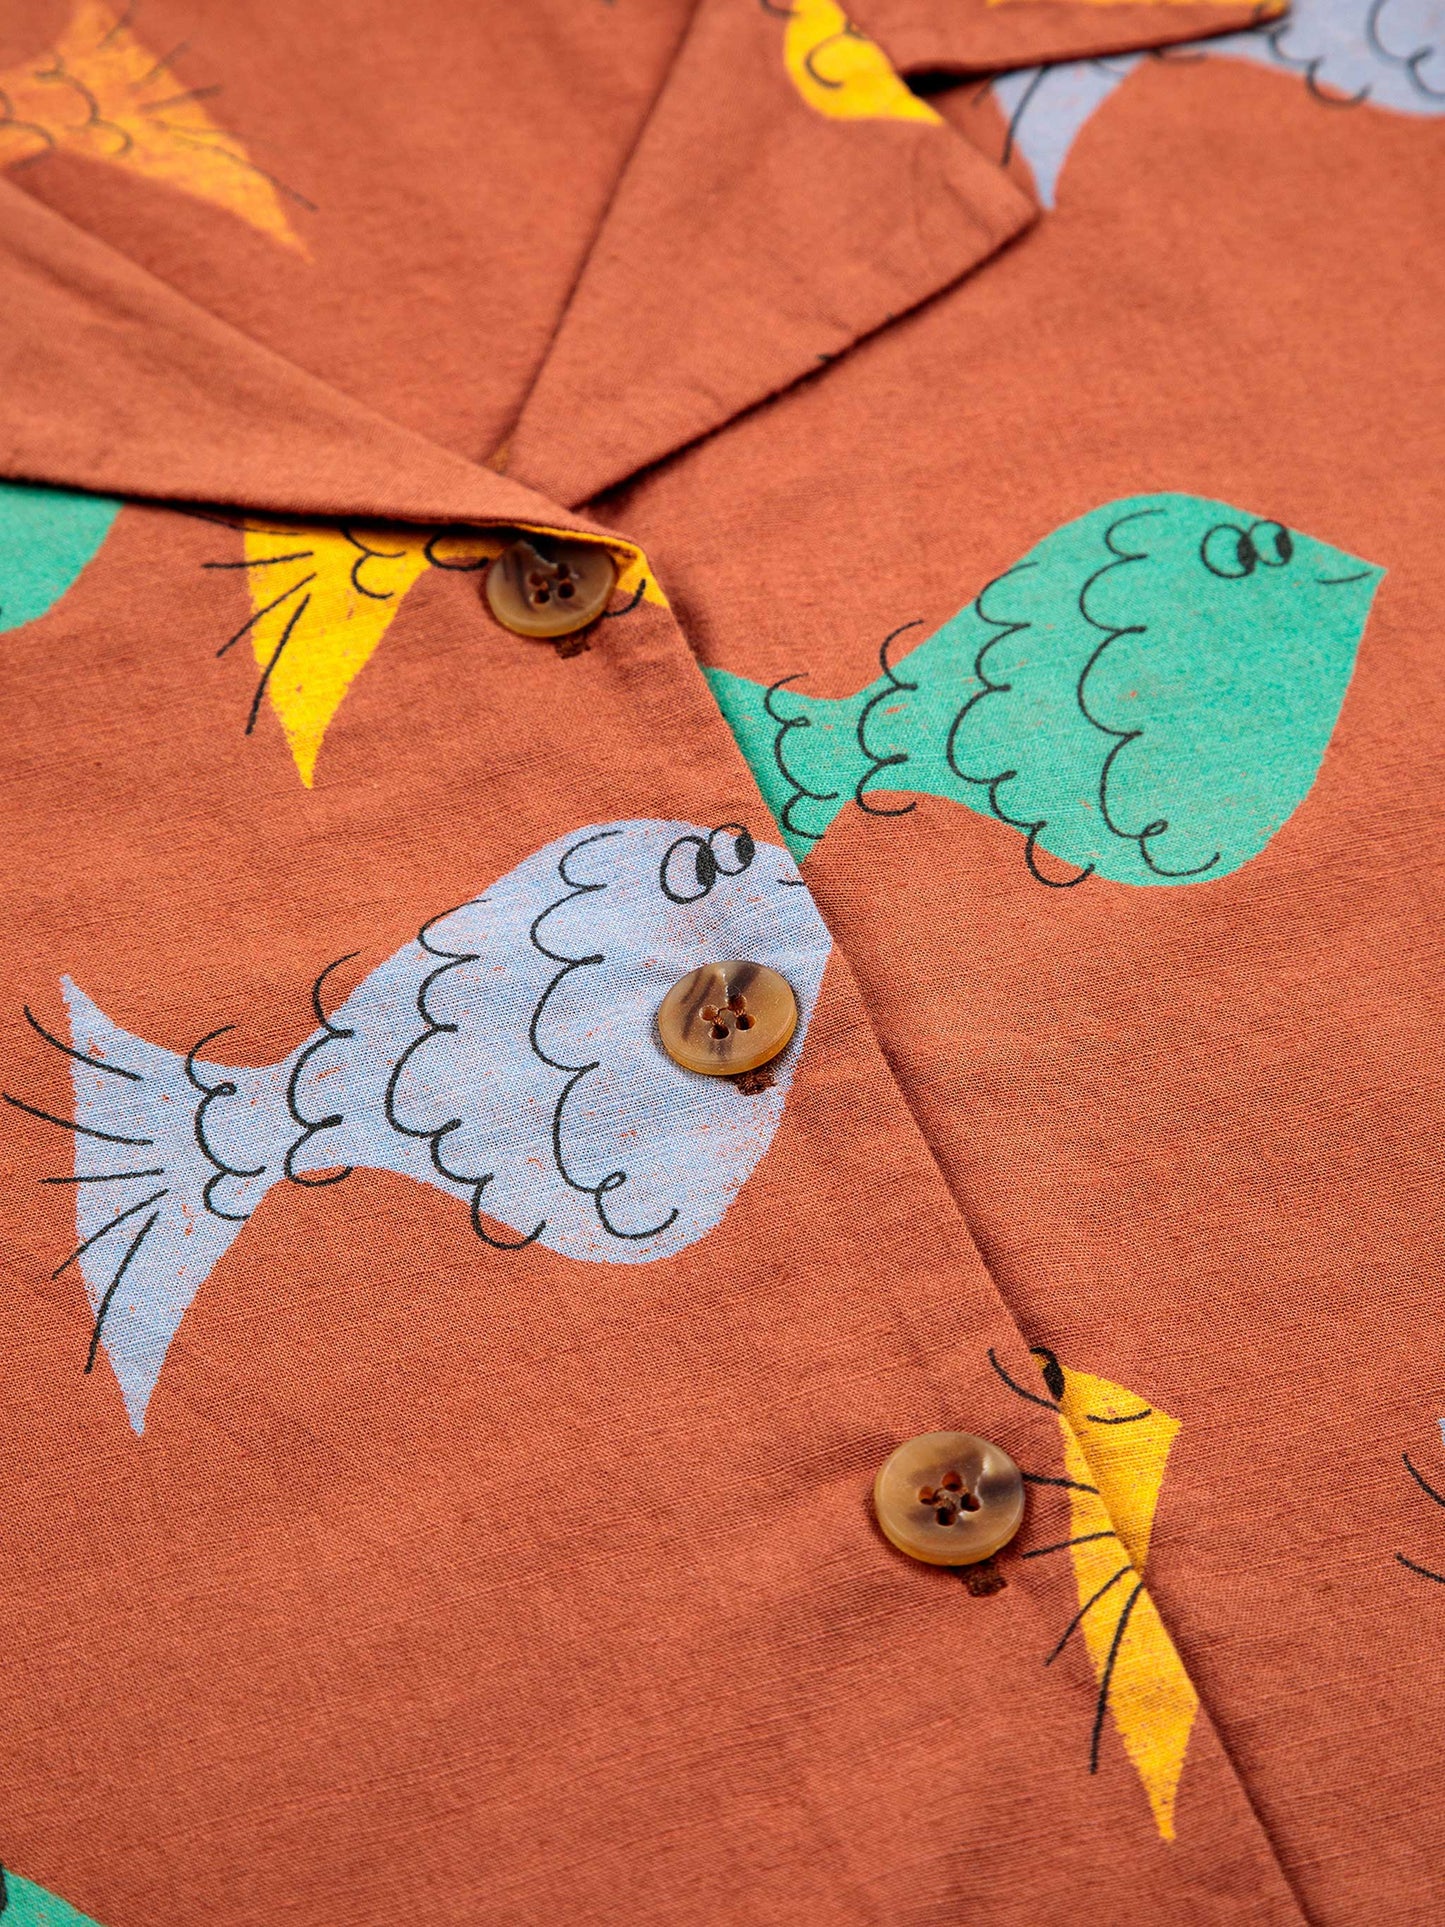 Multicolor Fish all over woven shirt